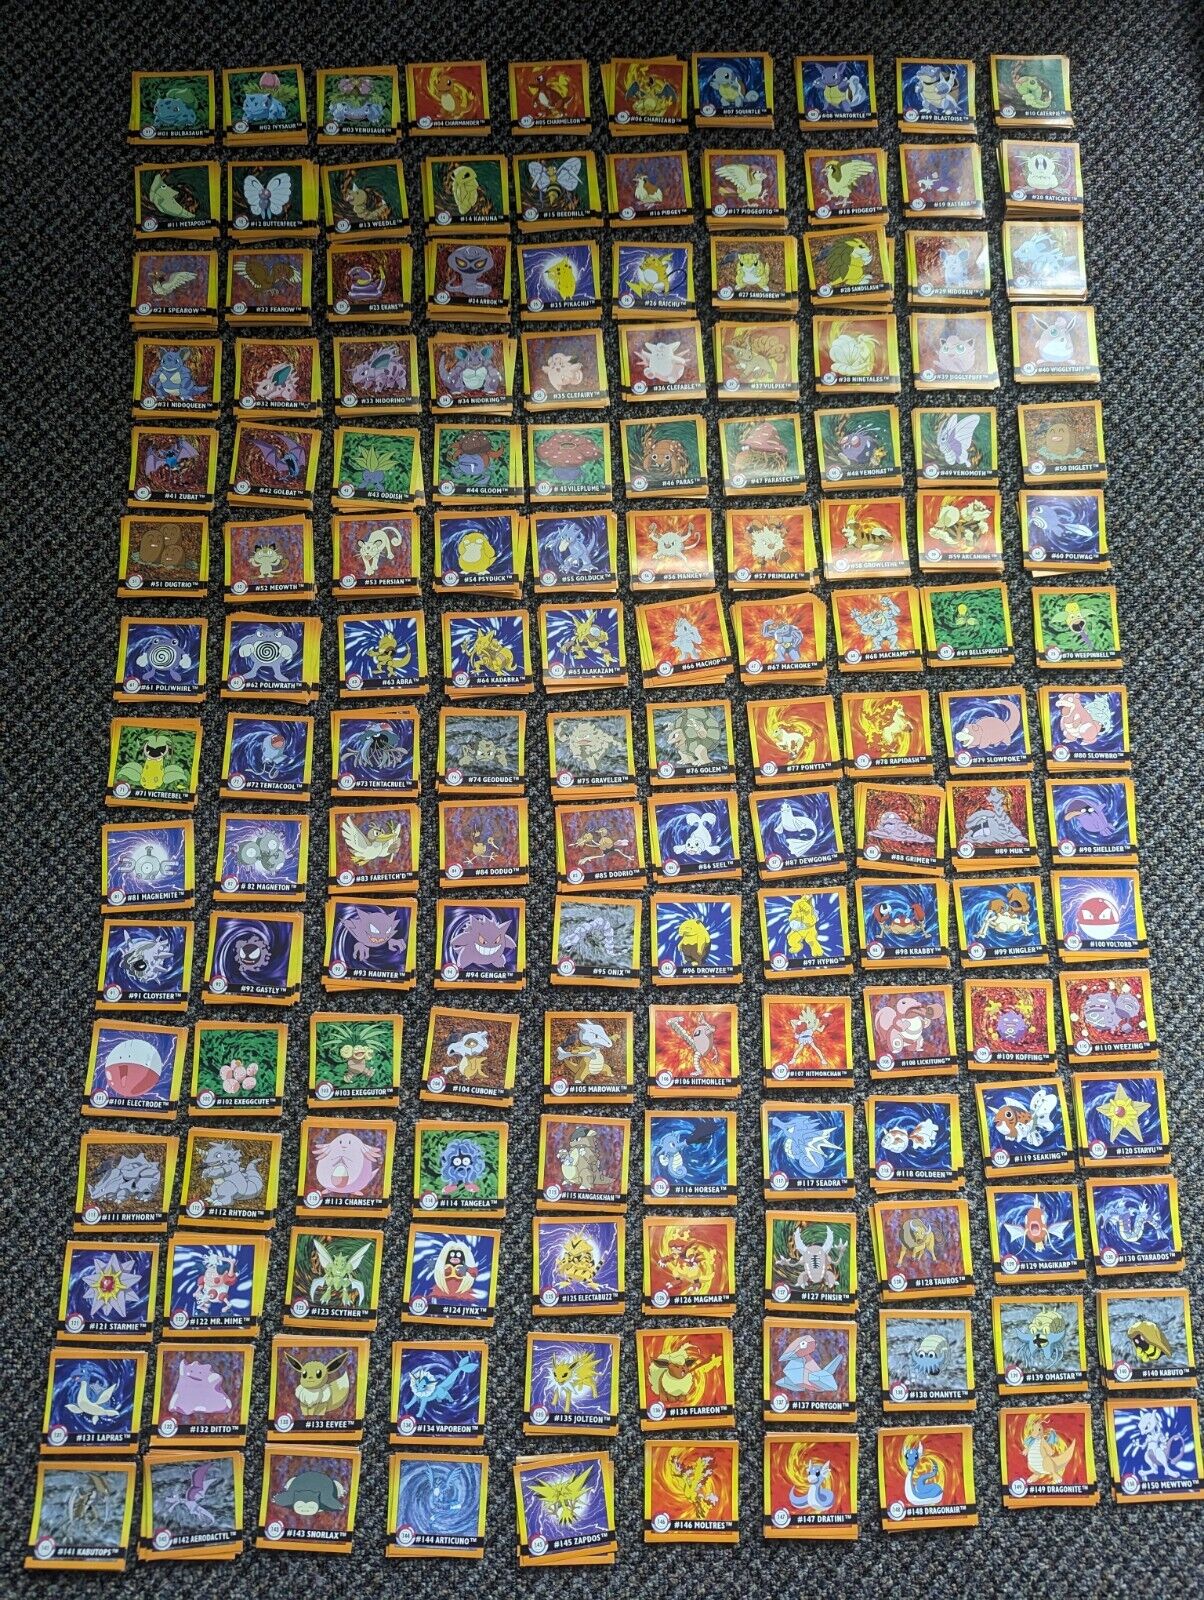 Full Set of 150- Artbox Series 1 Pokemon Stickers from 1999